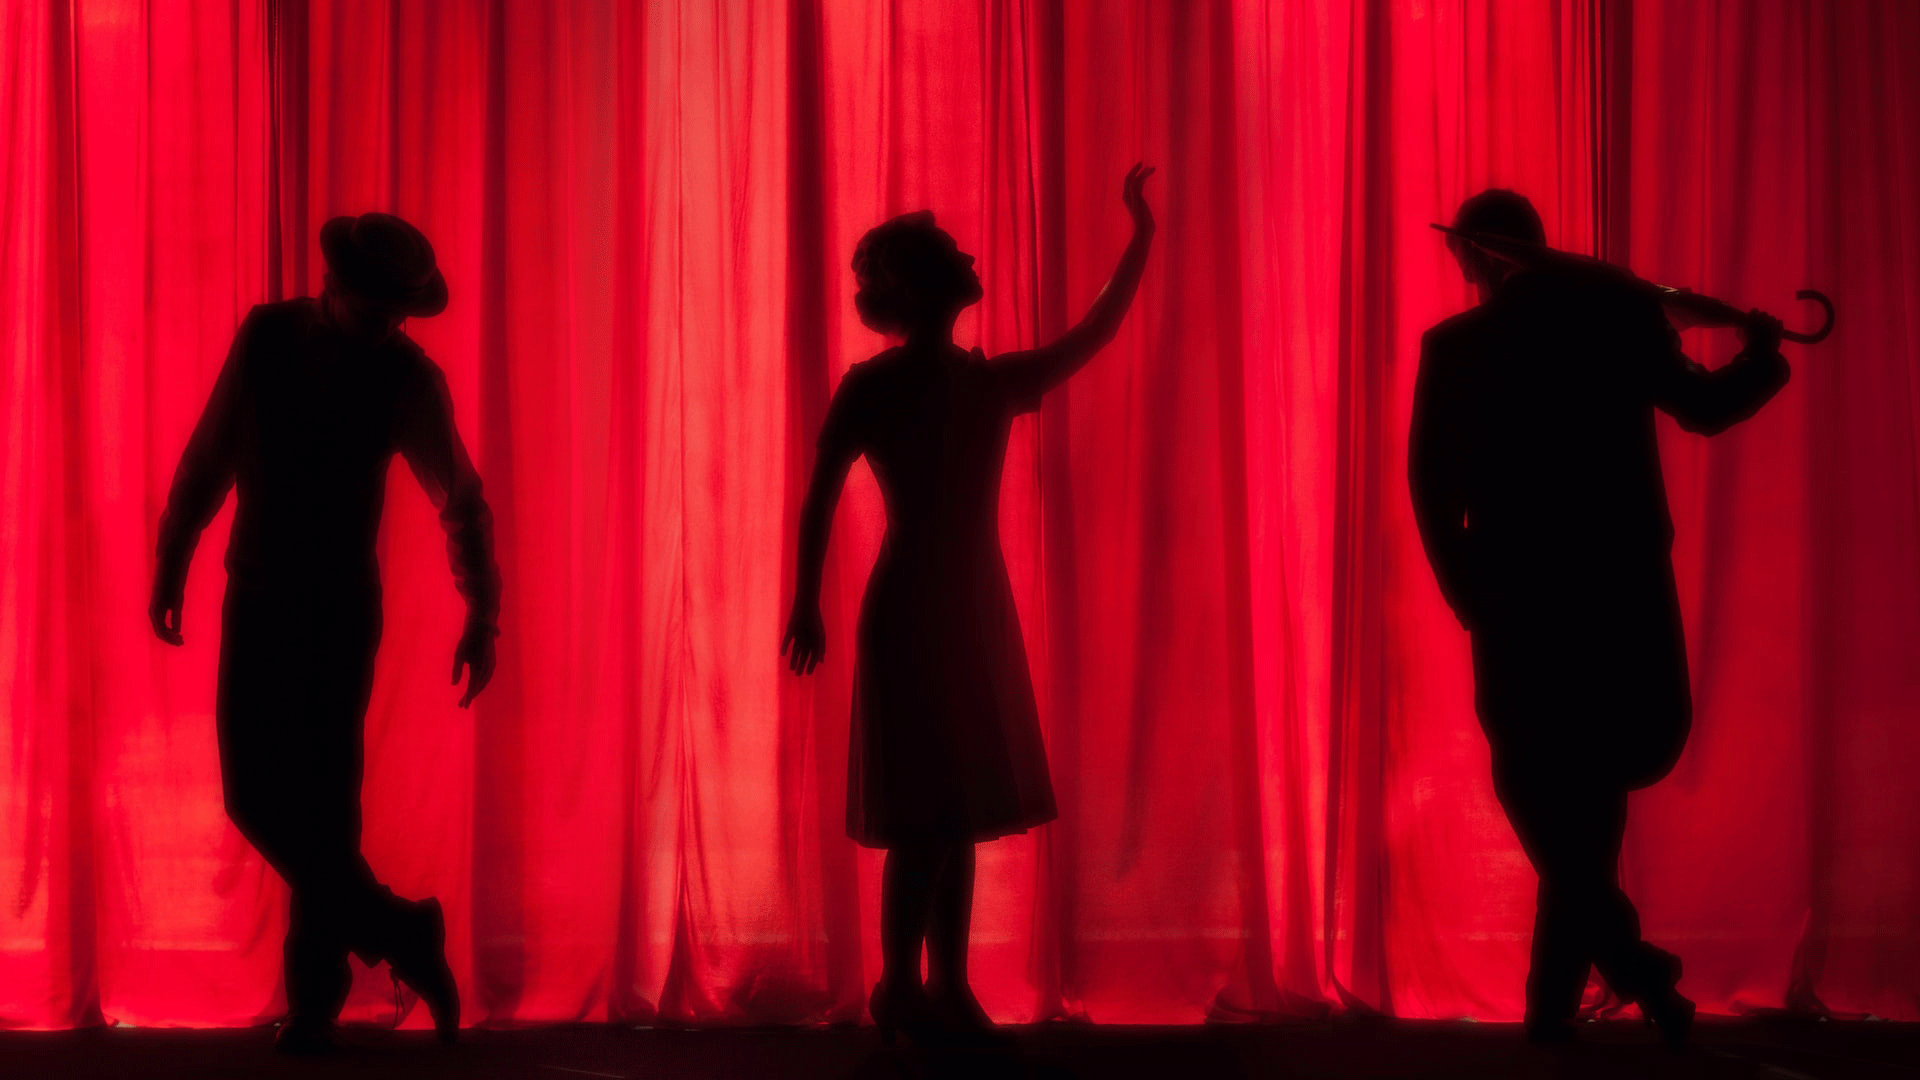 Three silhouettes on stage